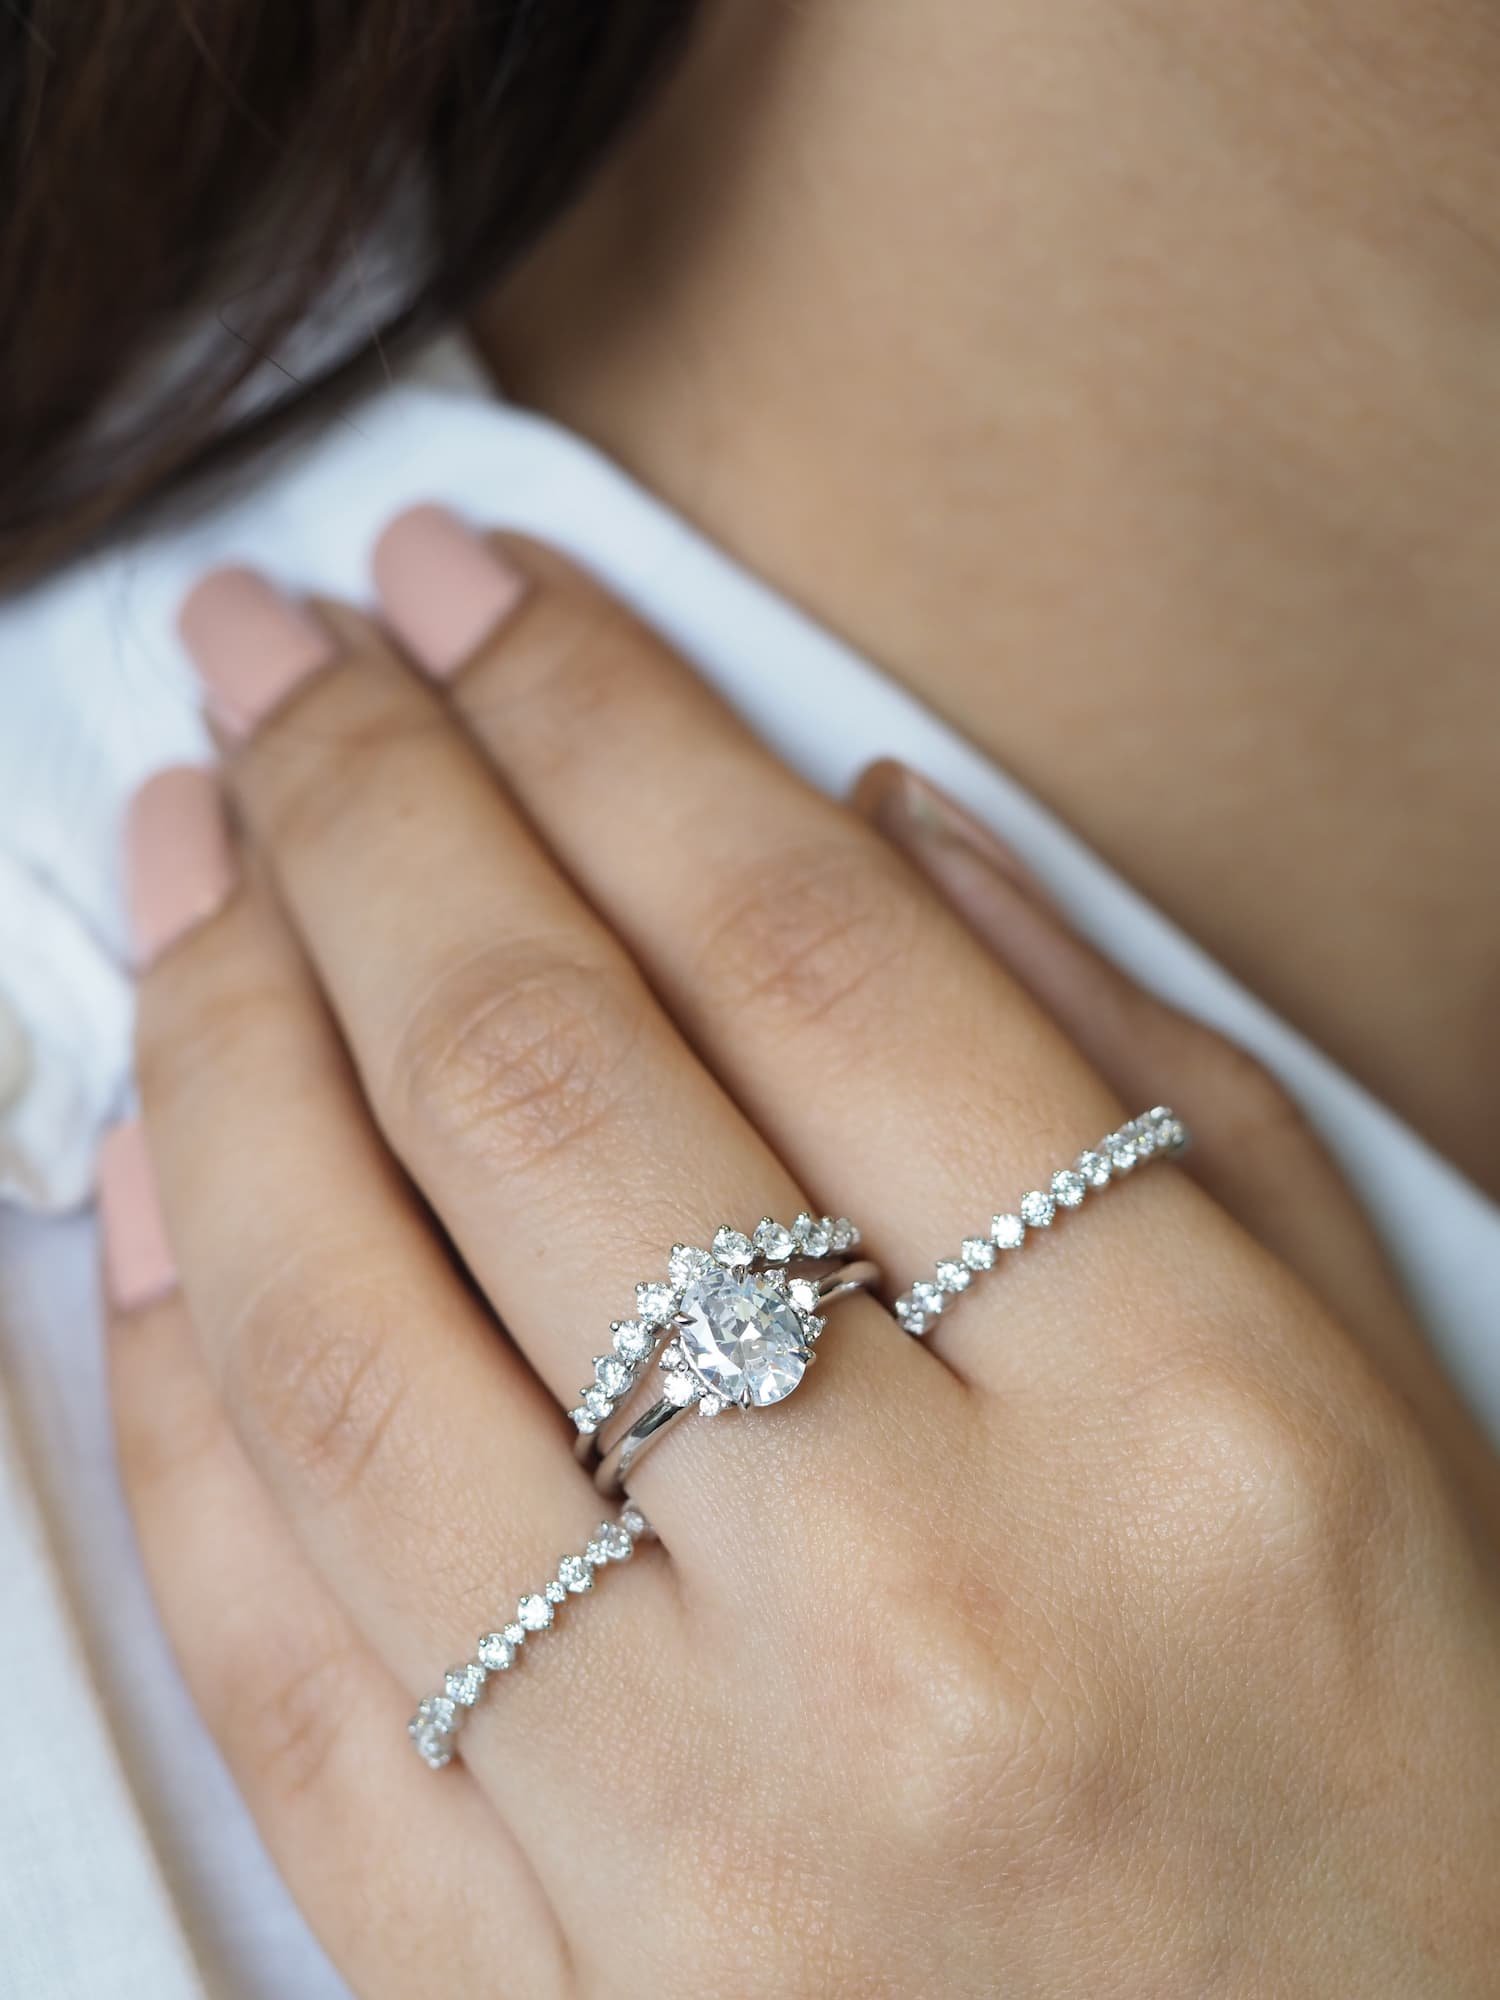 Sophia Diamond Engagement RIng with stackable rings